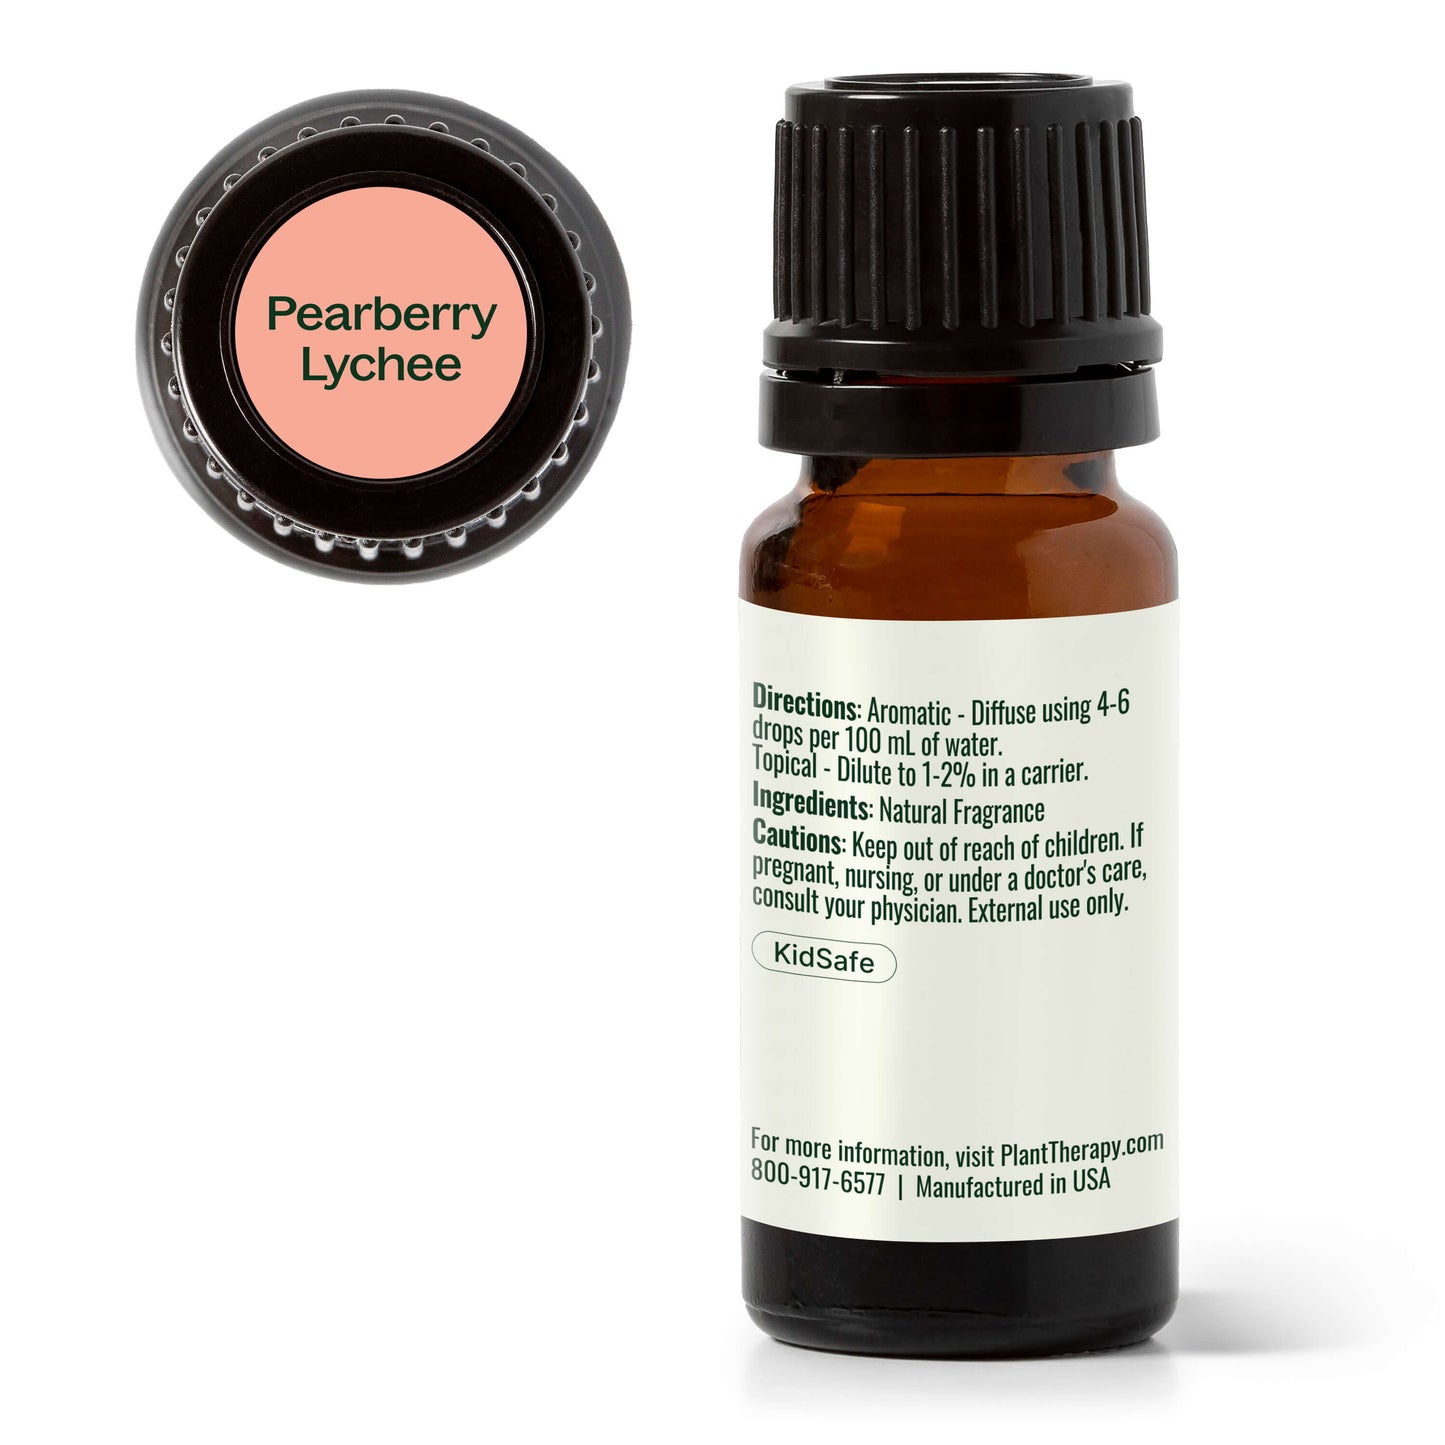 Pearberry Lychee Natural Fragrance